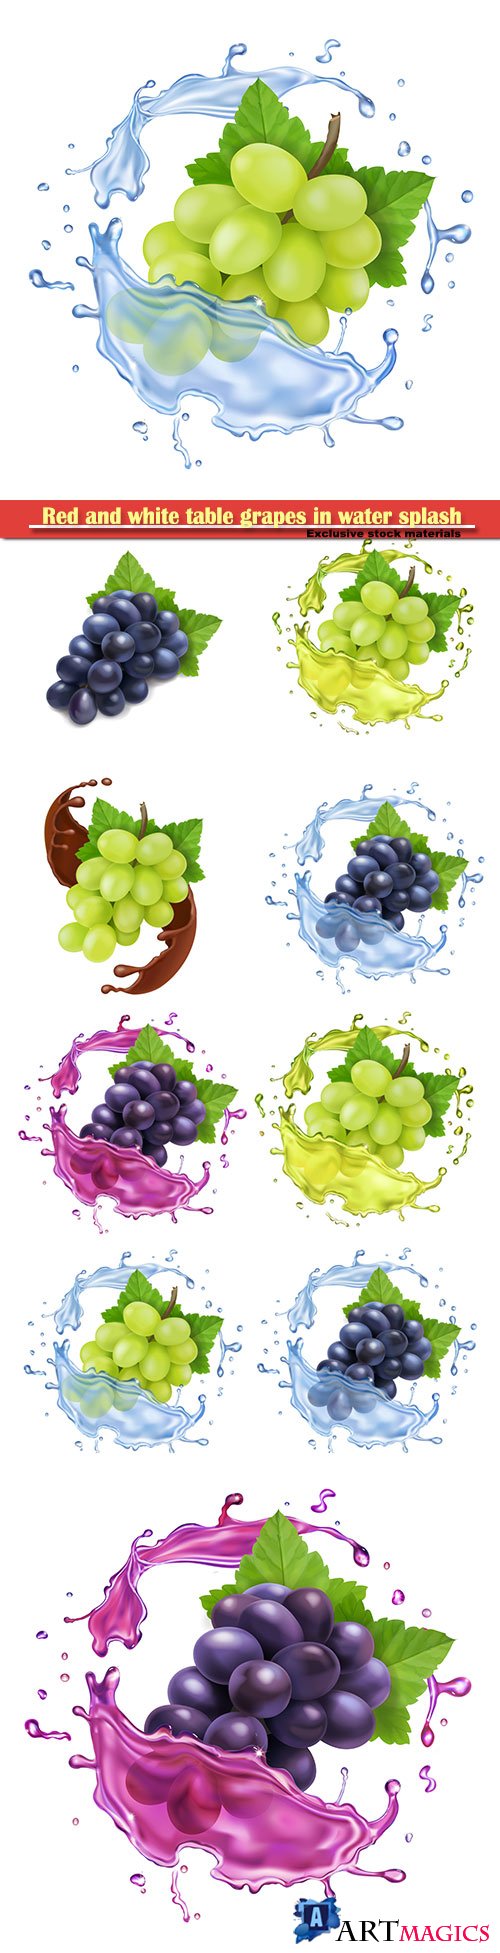 Red and white table grapes in water splash bunch of wine grapes realistic set